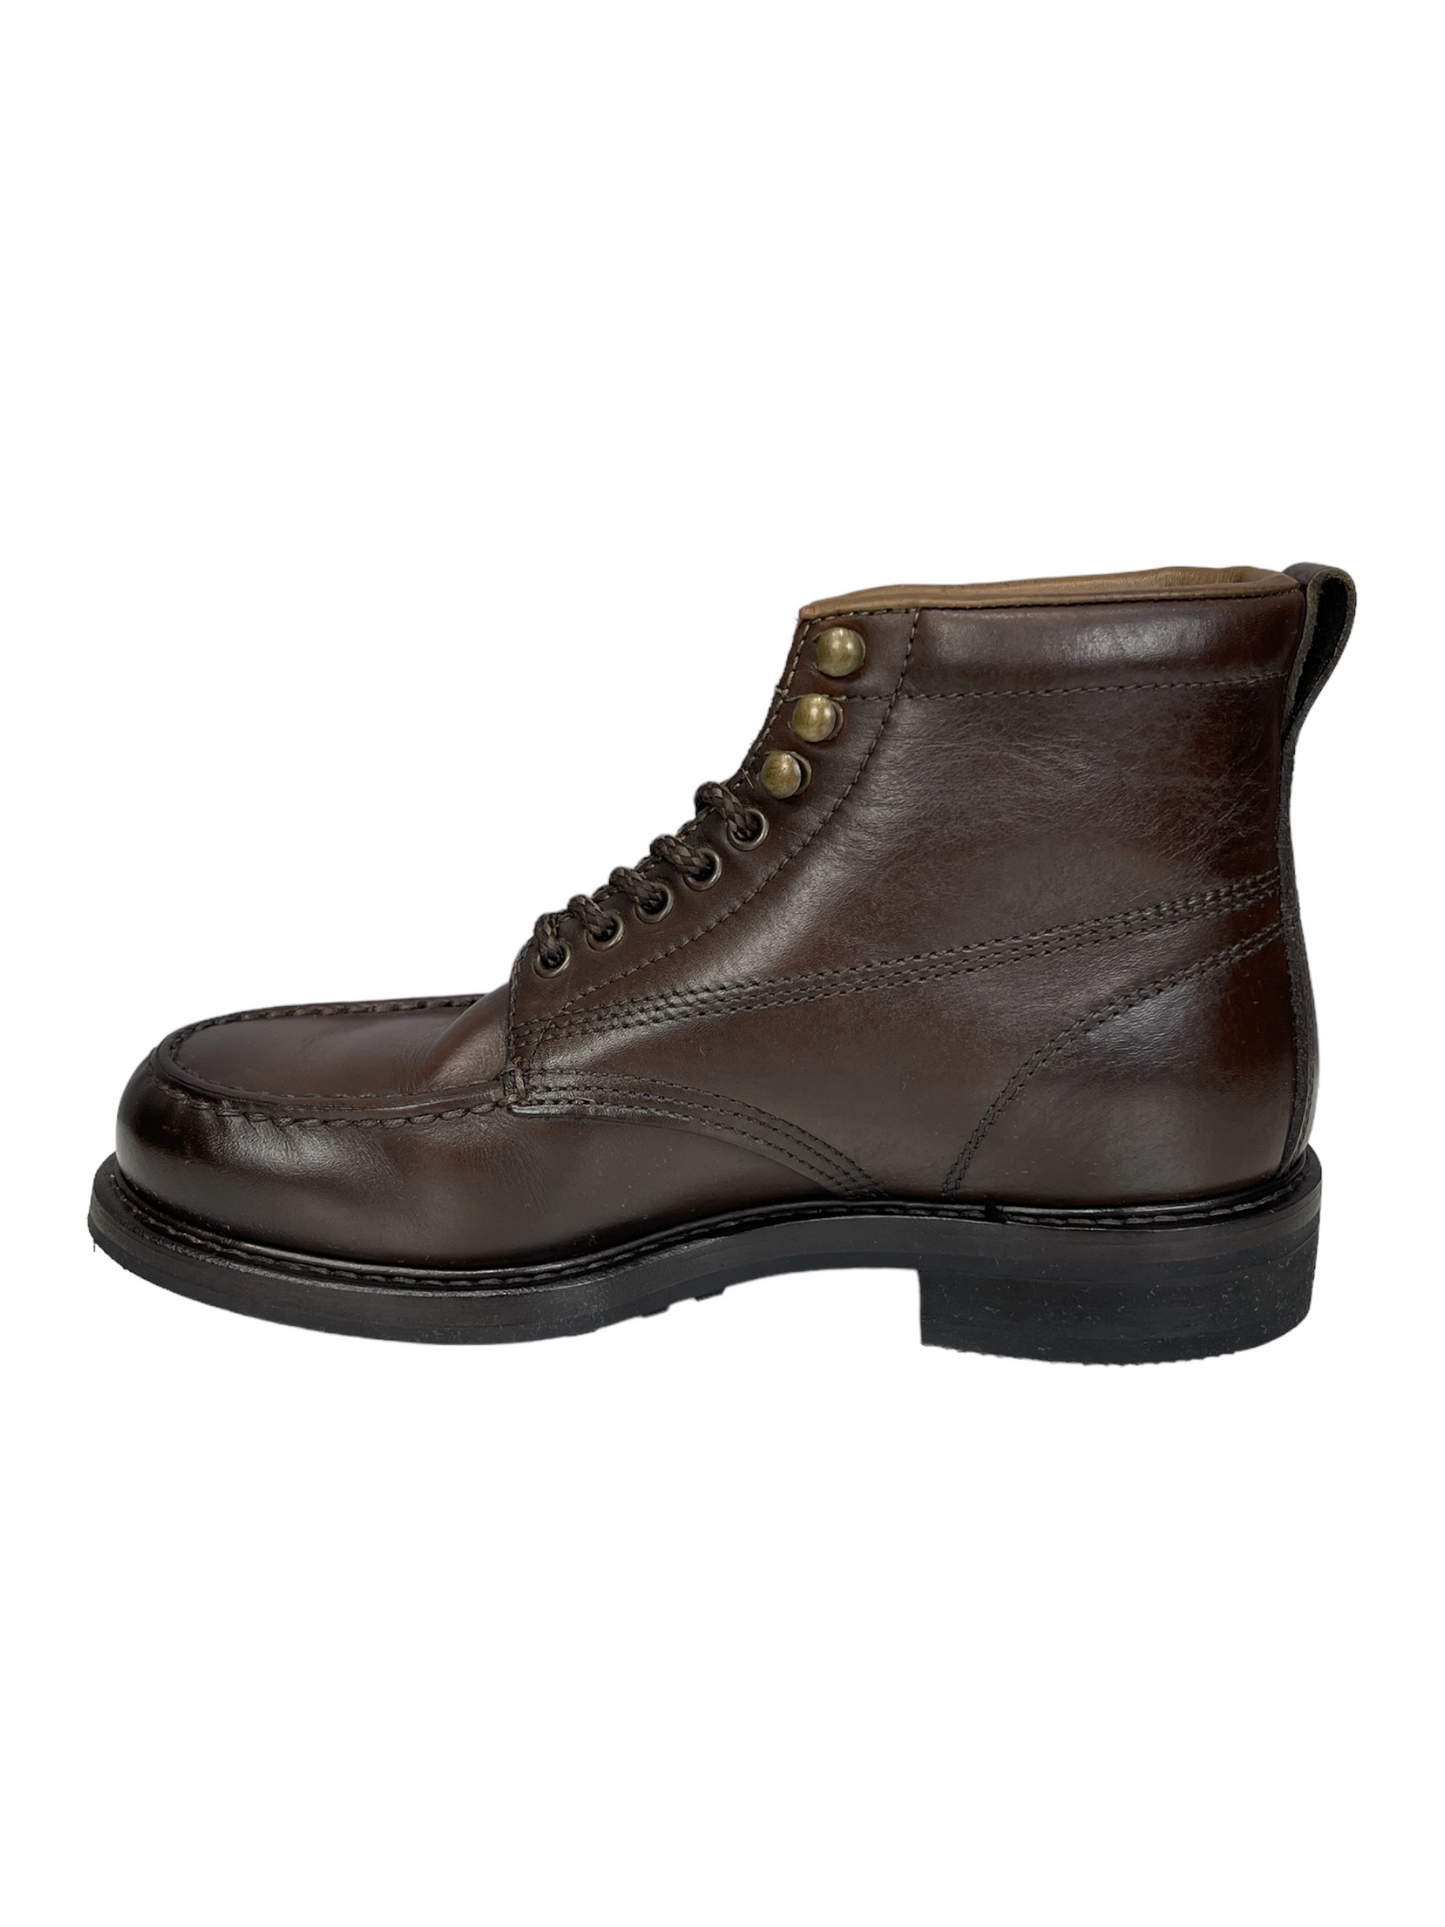 Tom Ford Brown Leather Work Boot 8 - Genuine Design Luxury Consignment Calgary, Alberta, Canada New and Pre-Owned Clothing, Shoes, Accessories.